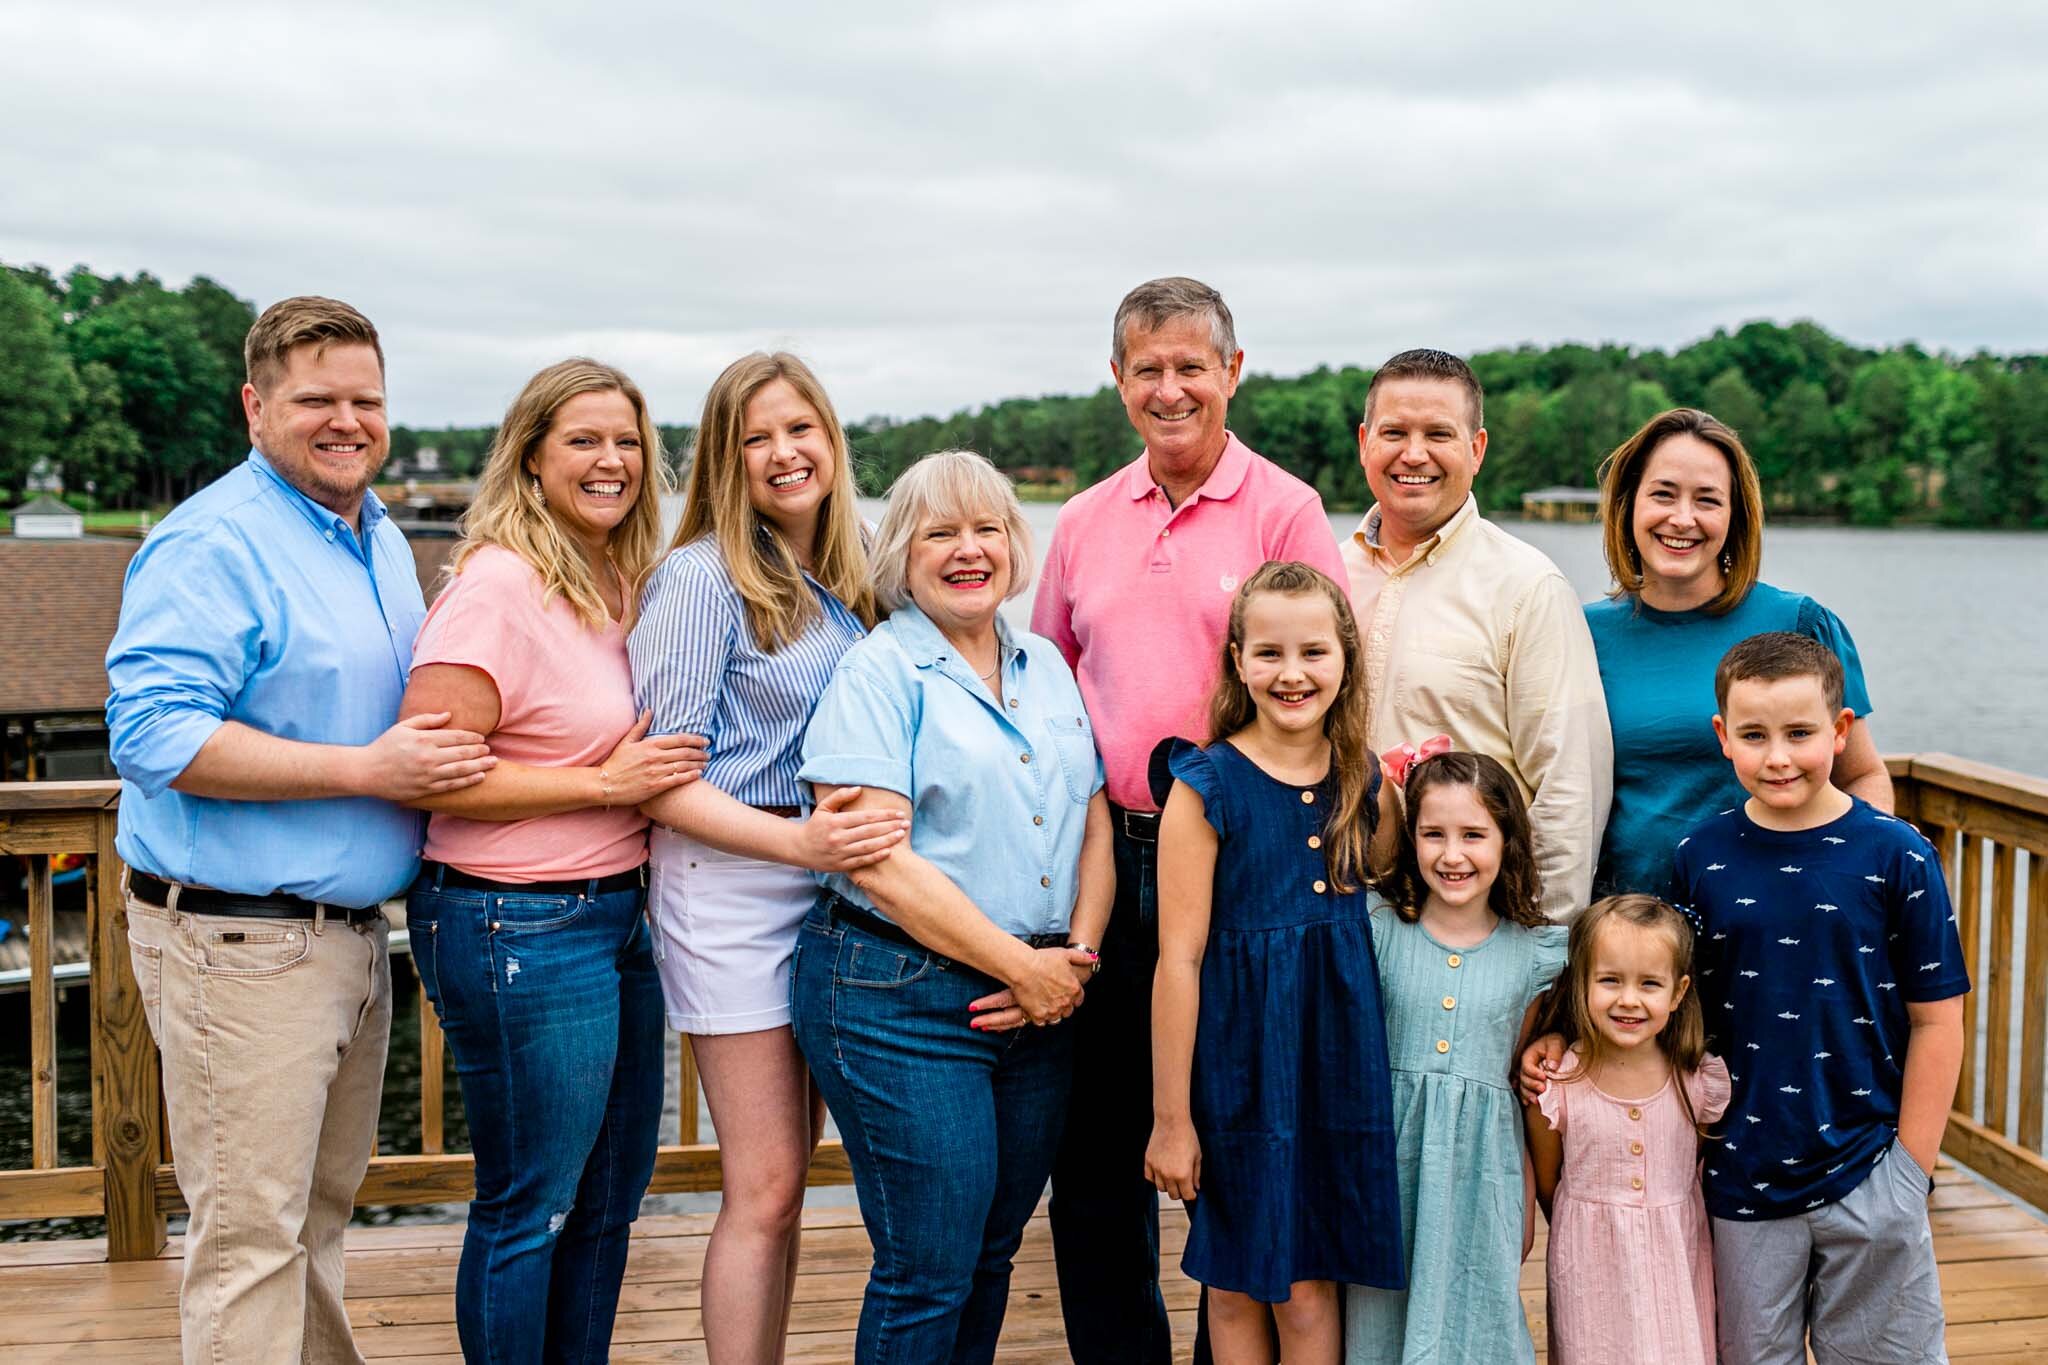 Lake Gaston Family Photographer | By G. Lin Photography | Beautiful candid family photo outside by the lake